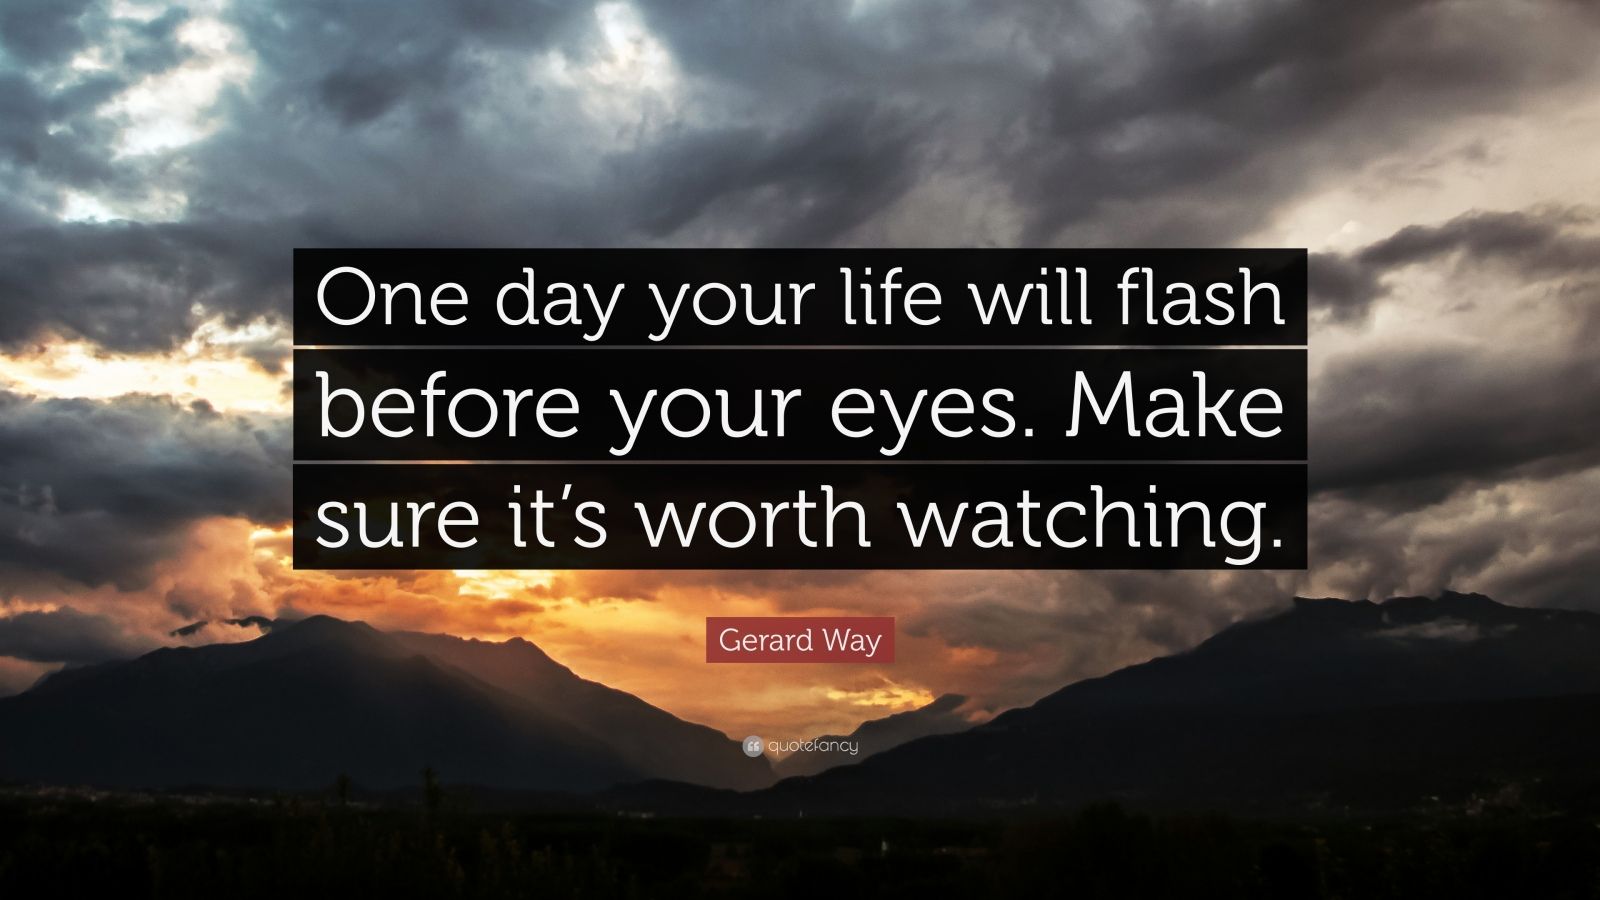 Gerard Way Quote: “One day your life will flash before your eyes. Make